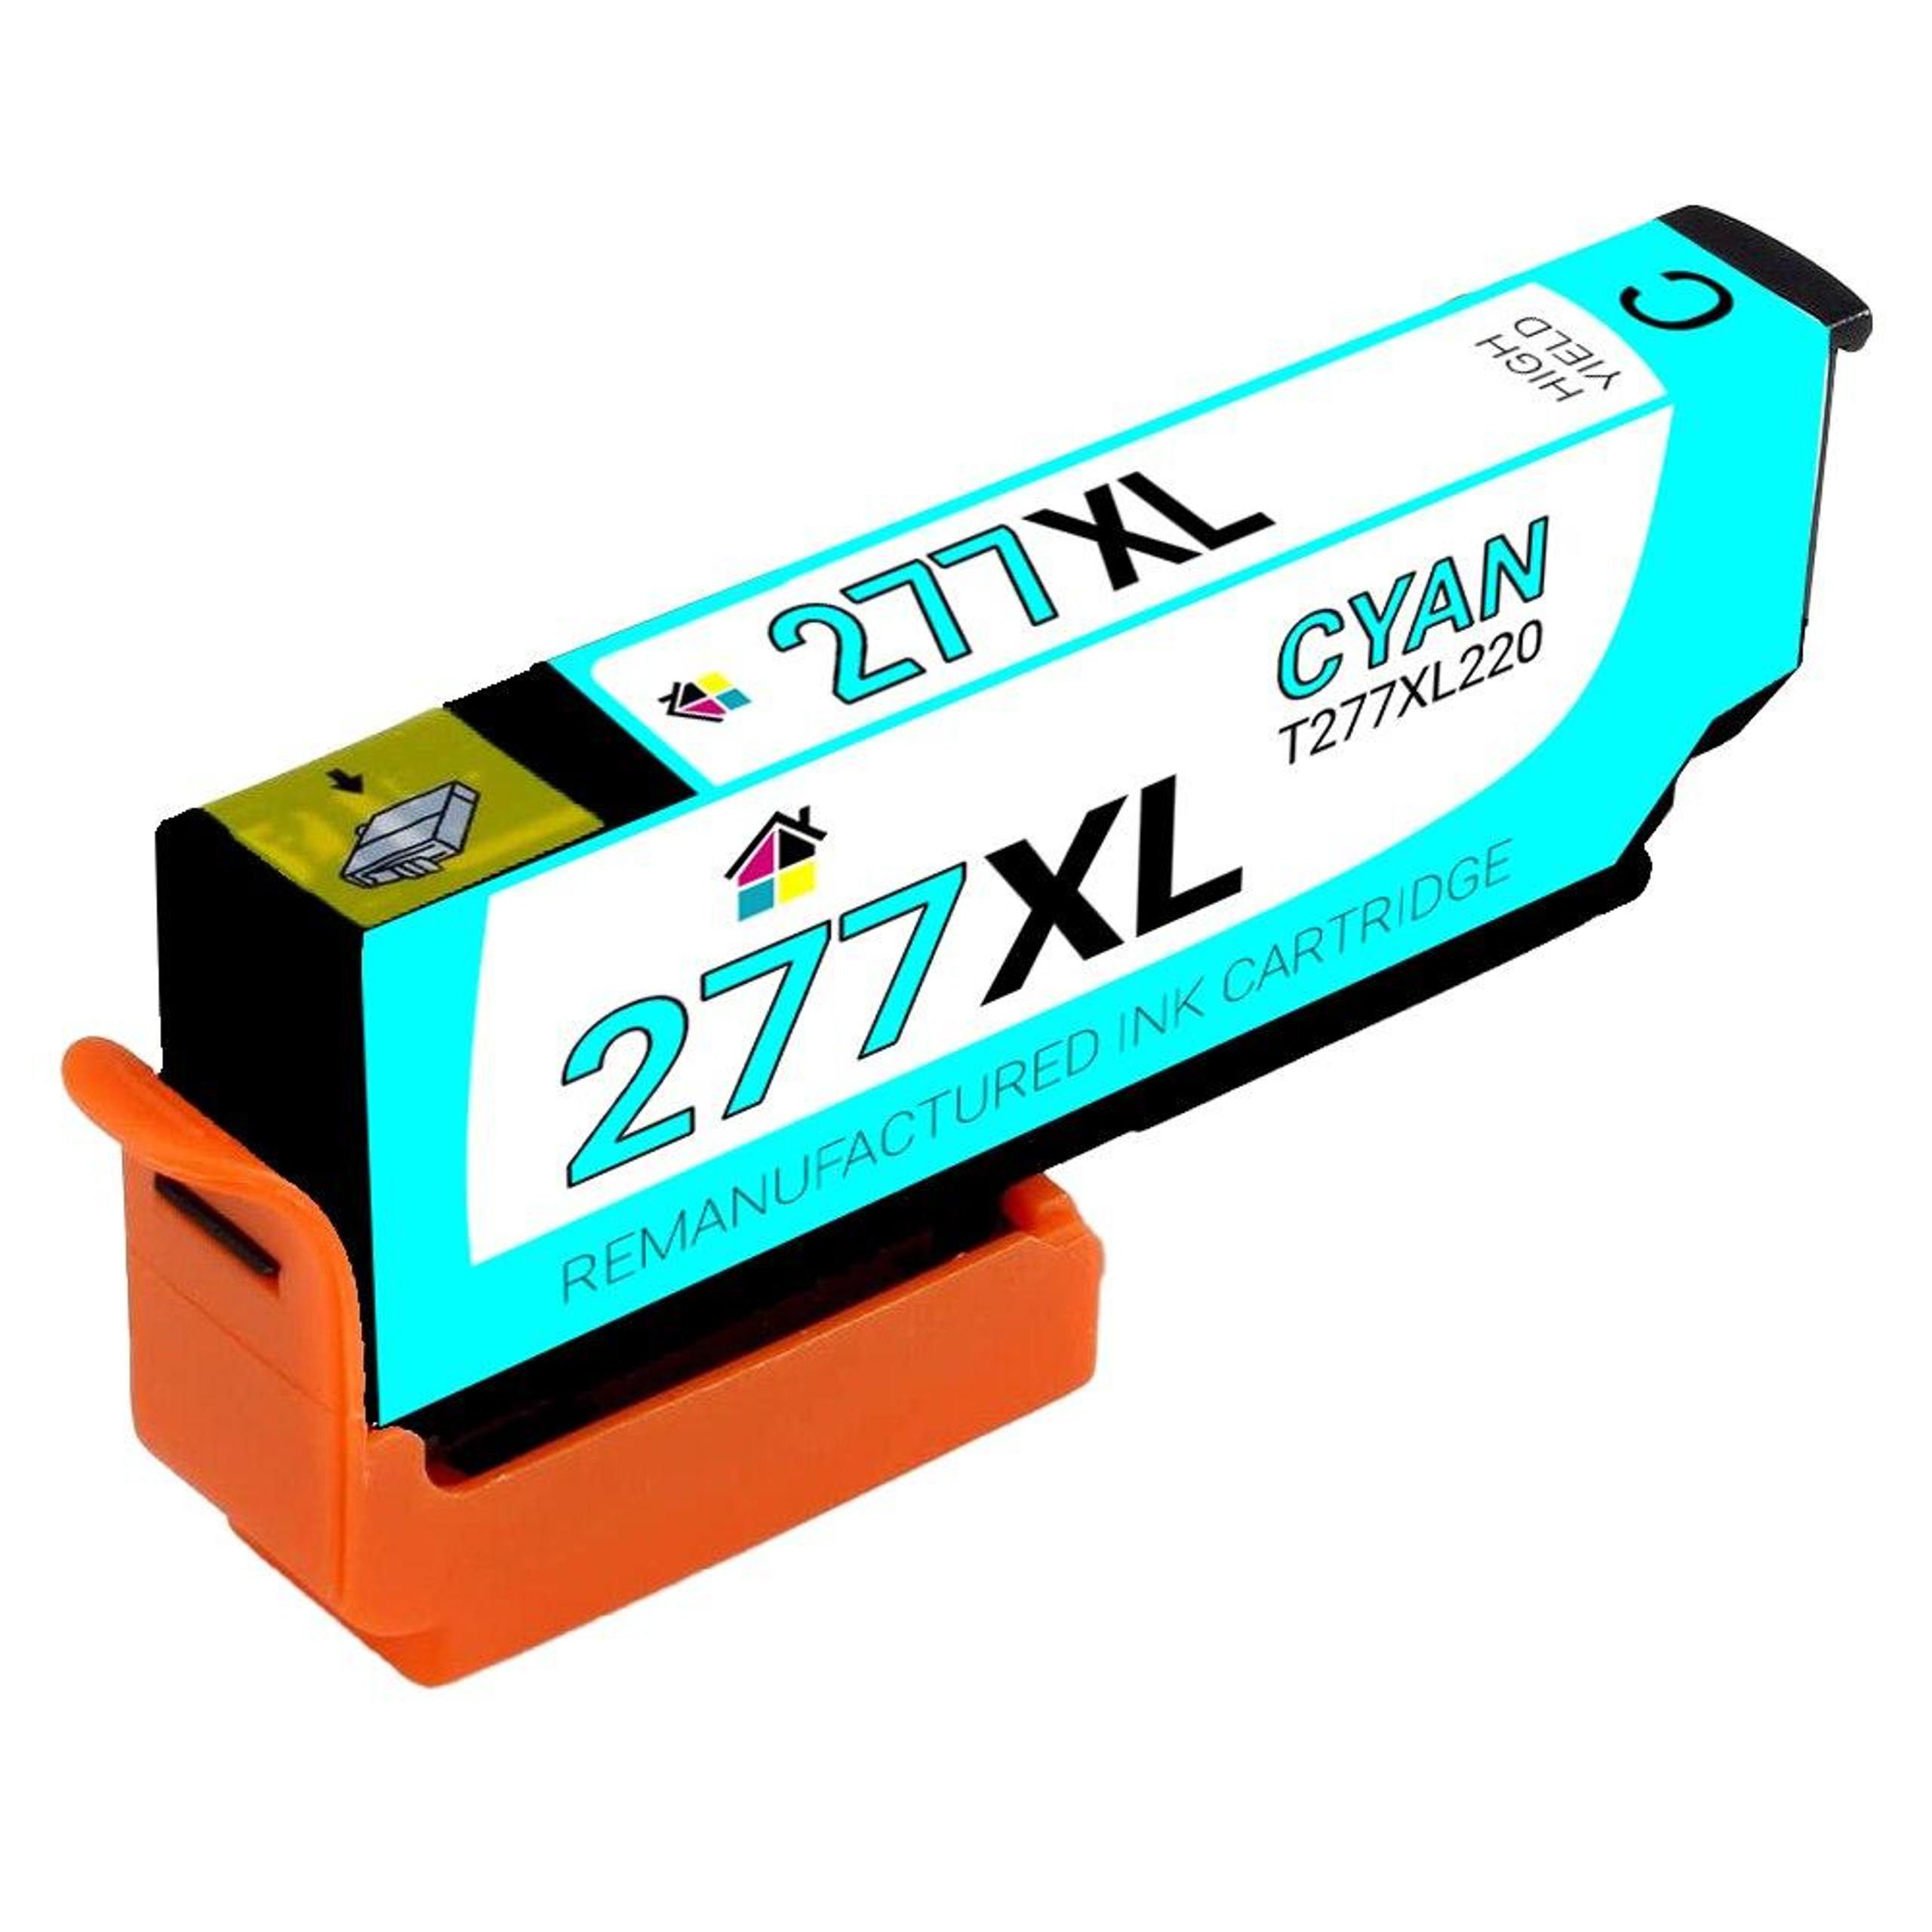 Remanufactured Ink Cartridge For Epson T277xl T277xl120 Hy Black Houseofinks 1855